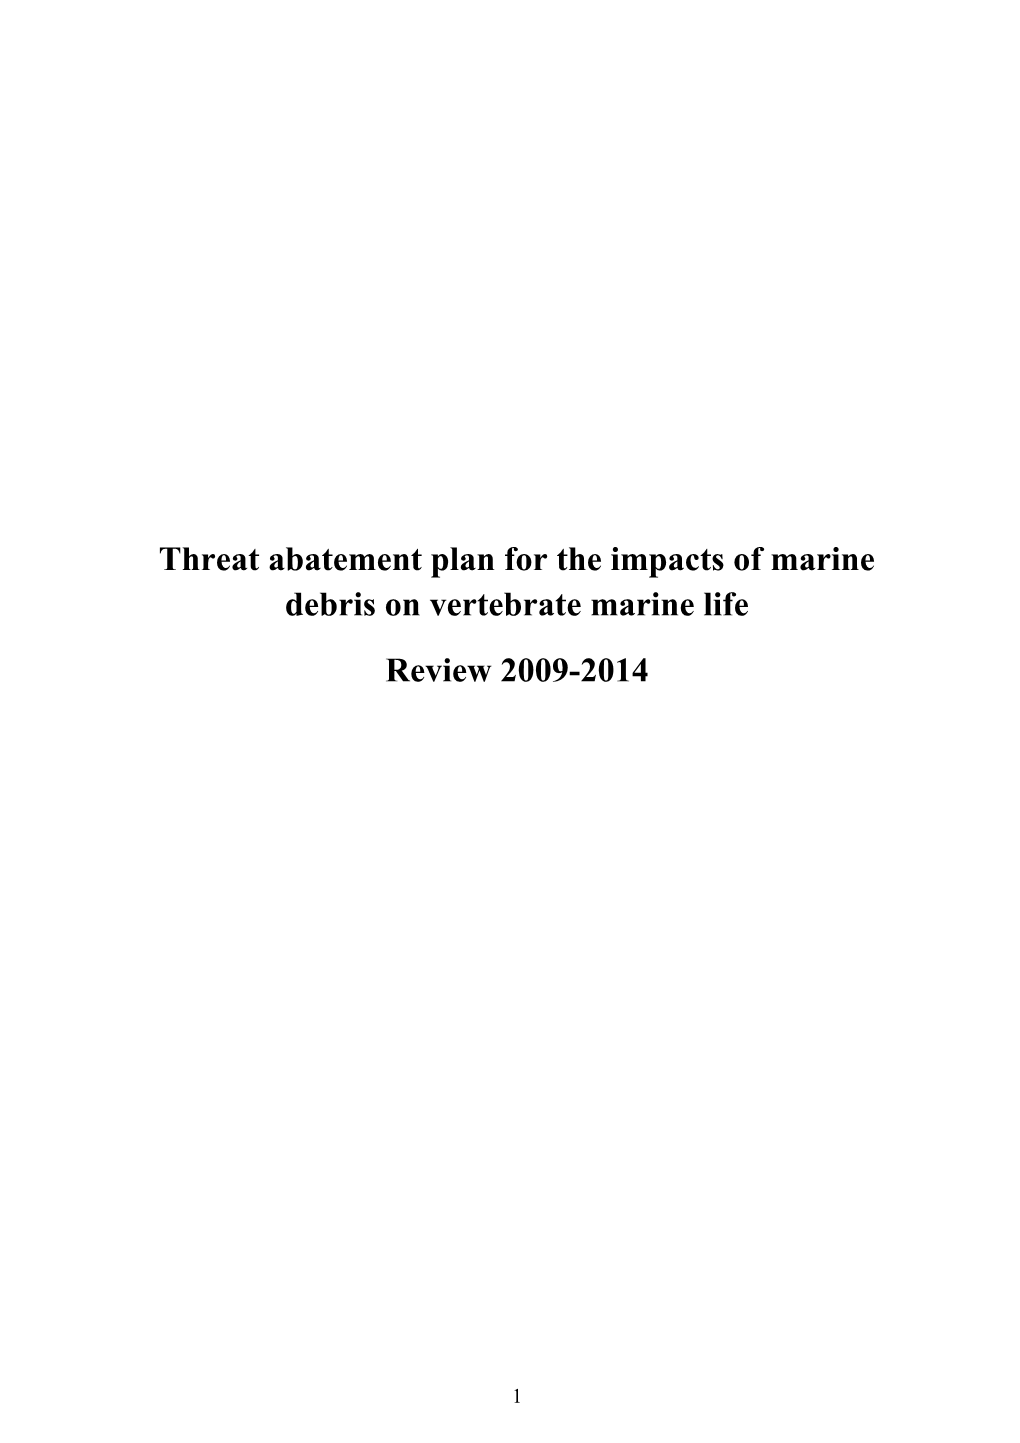 Threat Abatement Plan for the Impacts of Marine Debris on Vertebrate Marine Life Review